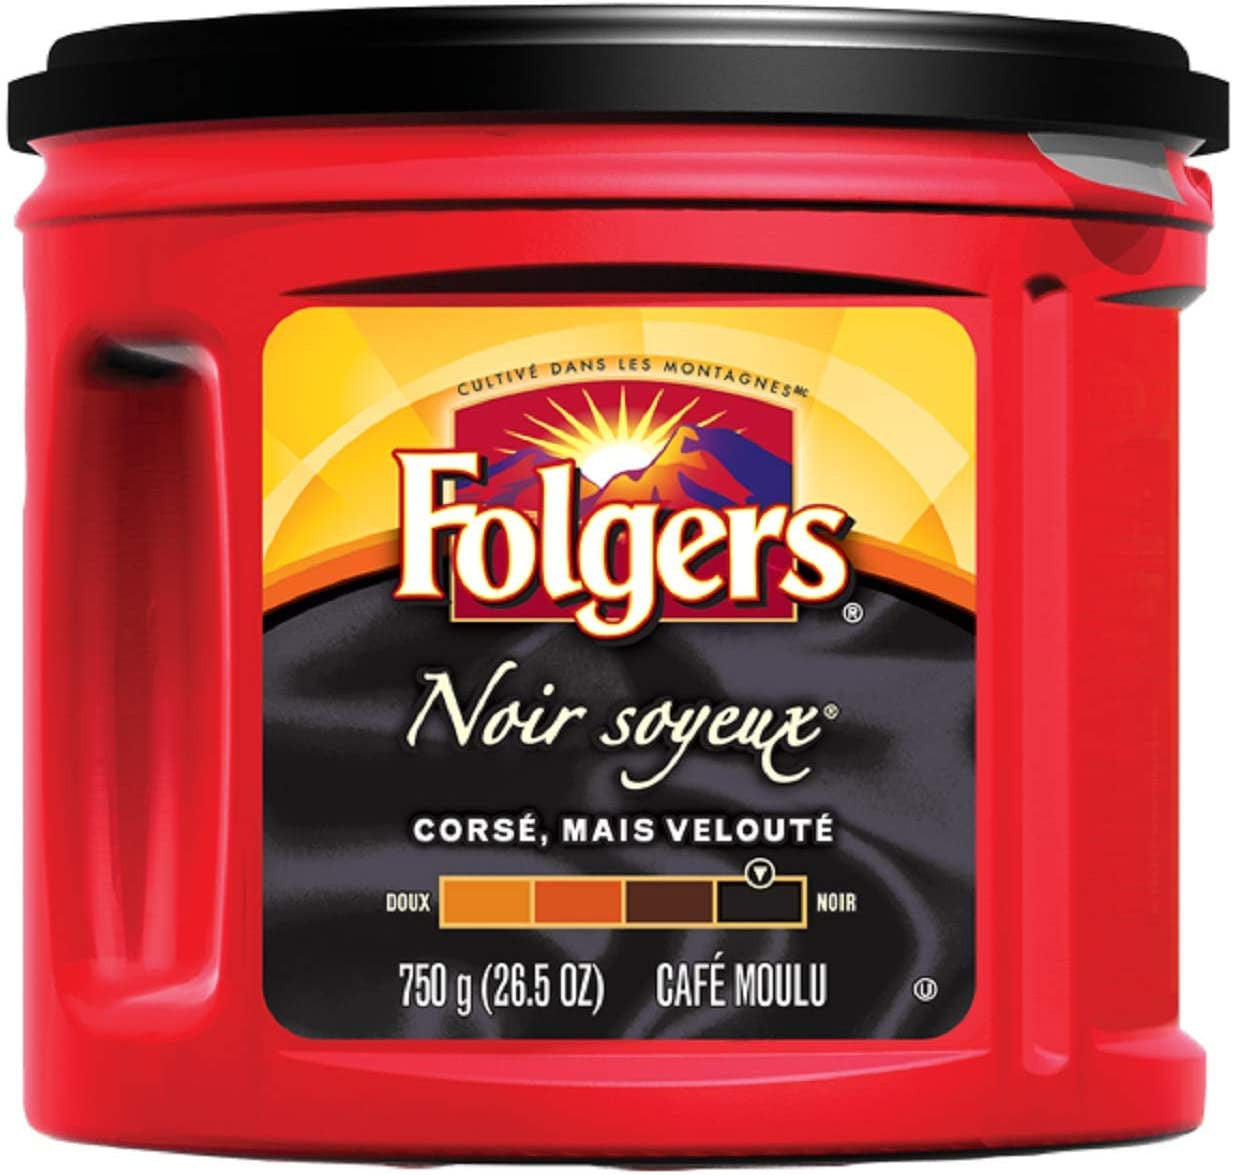 Folgers Black Silk Ground Coffee, 750g/26.5 oz., {Imported from Canada}